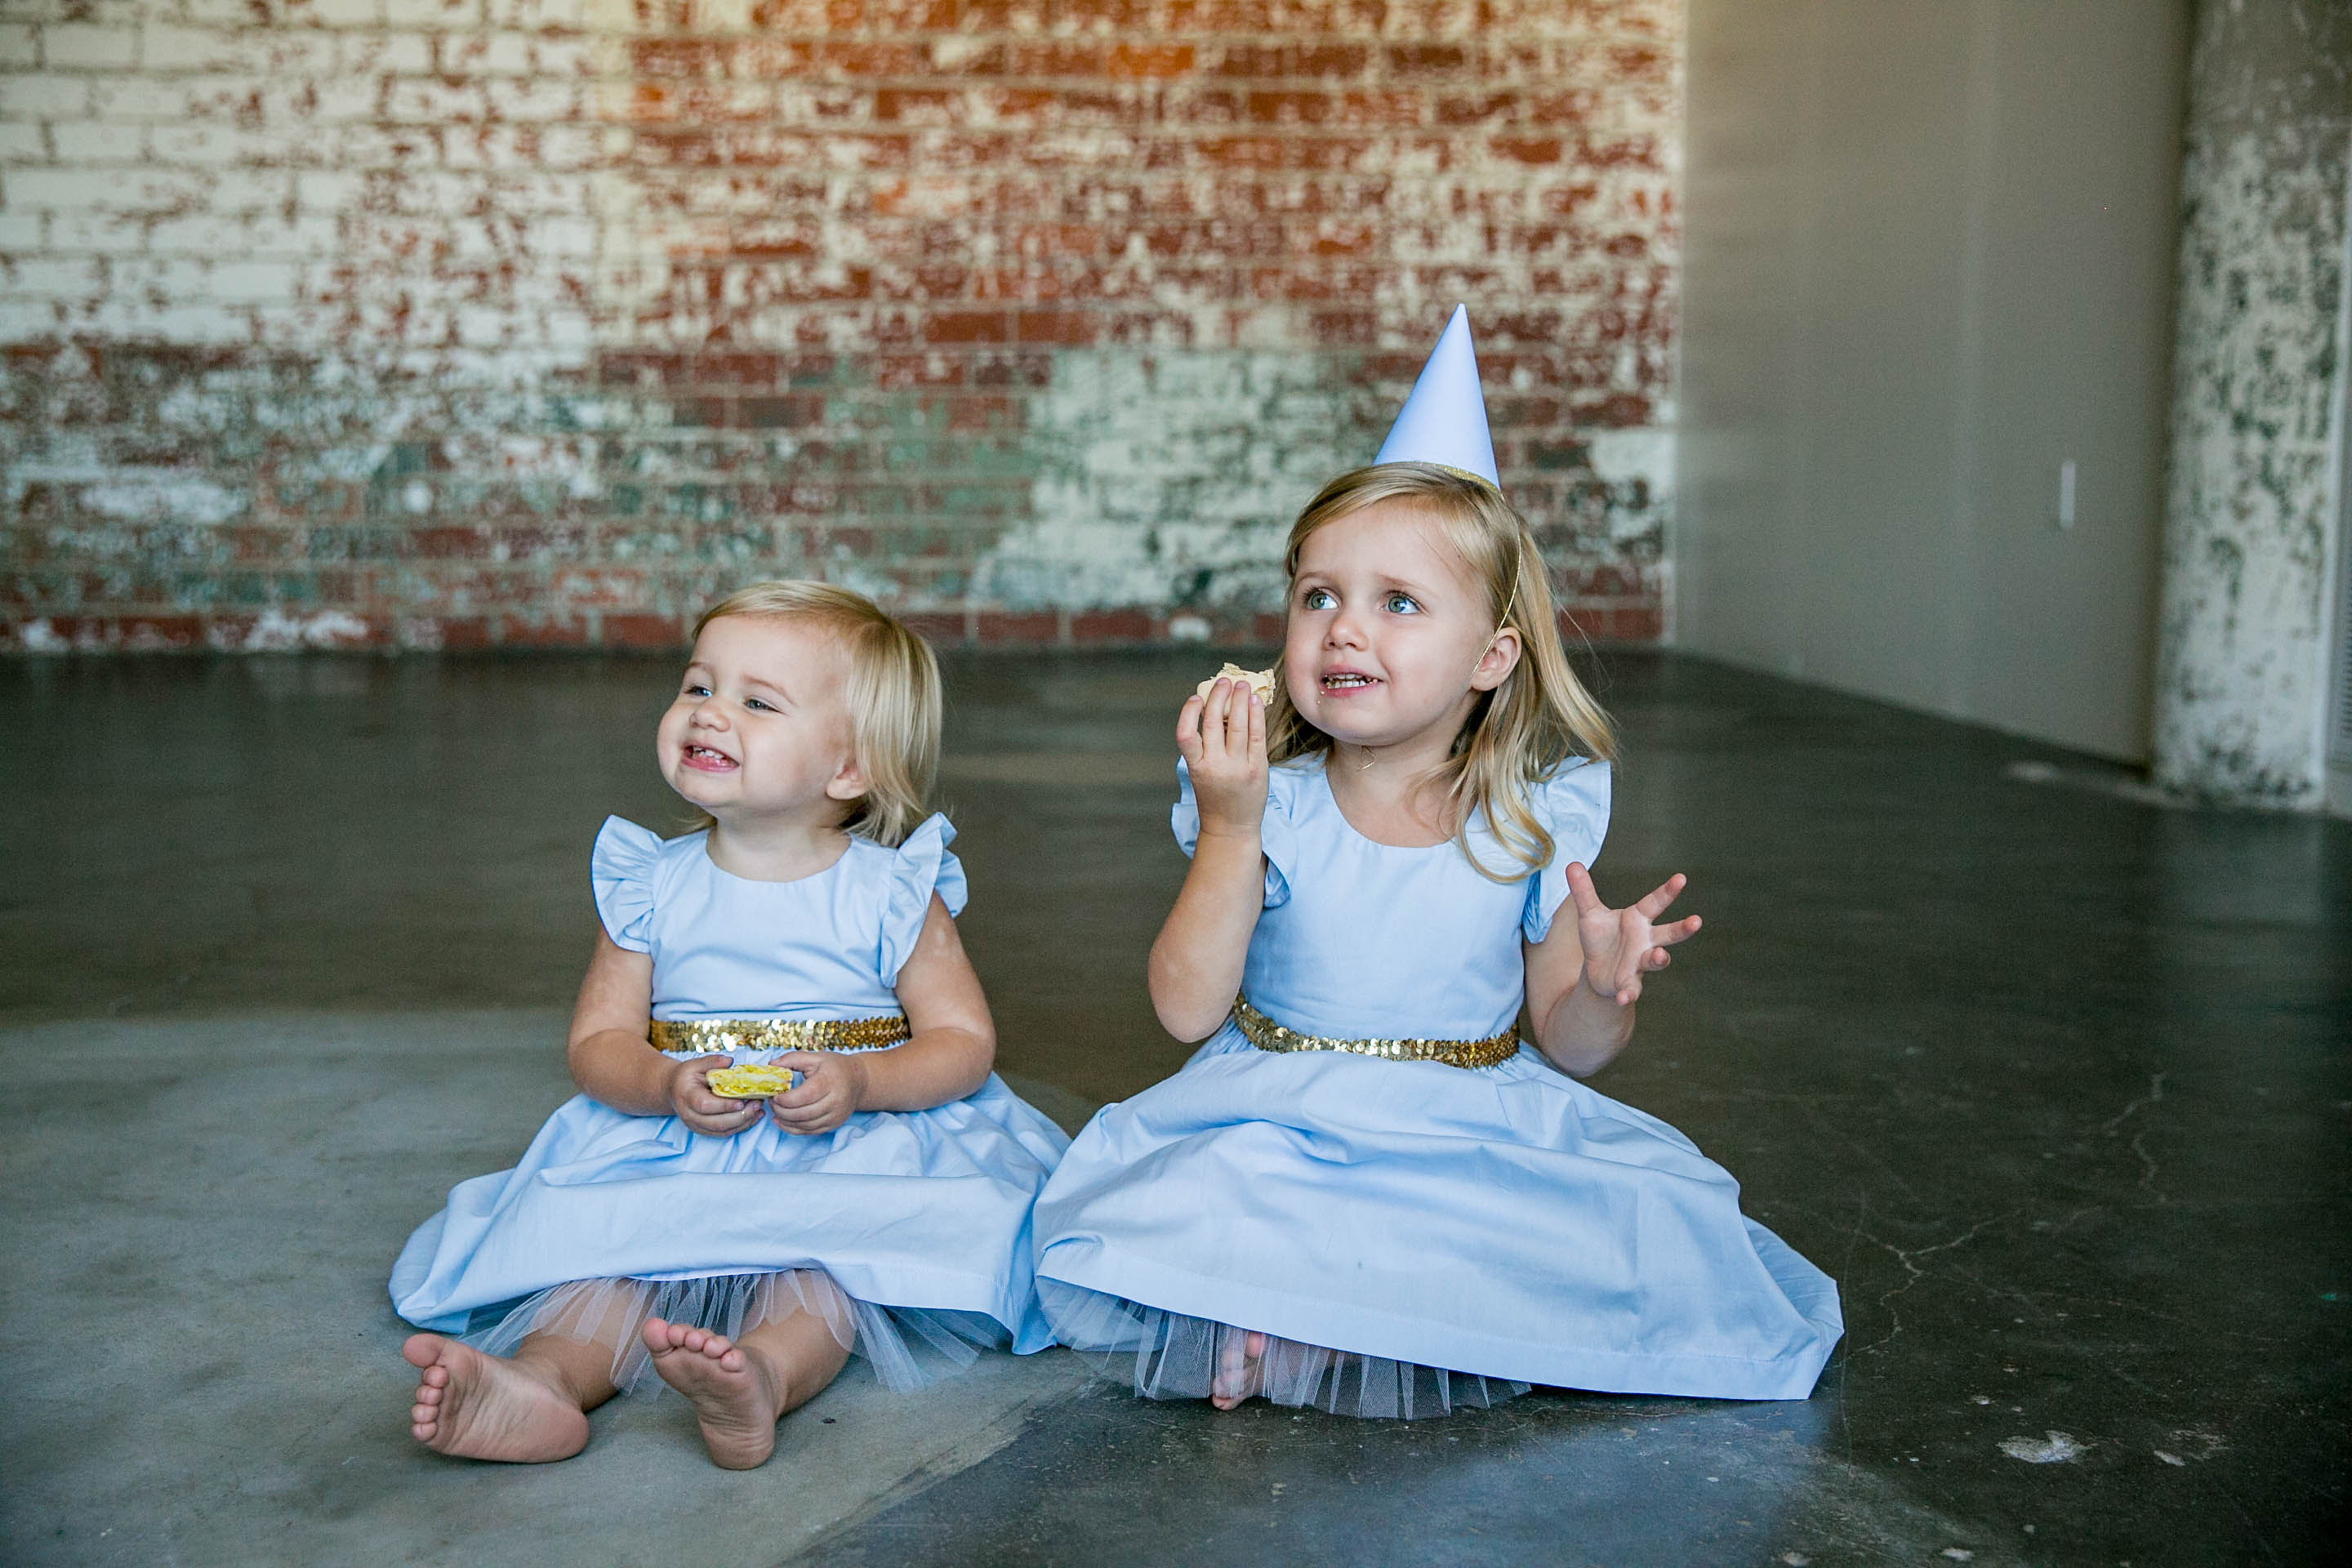 custom Cinderella dresses for matching sister outfits // order yours at cuteheads.com